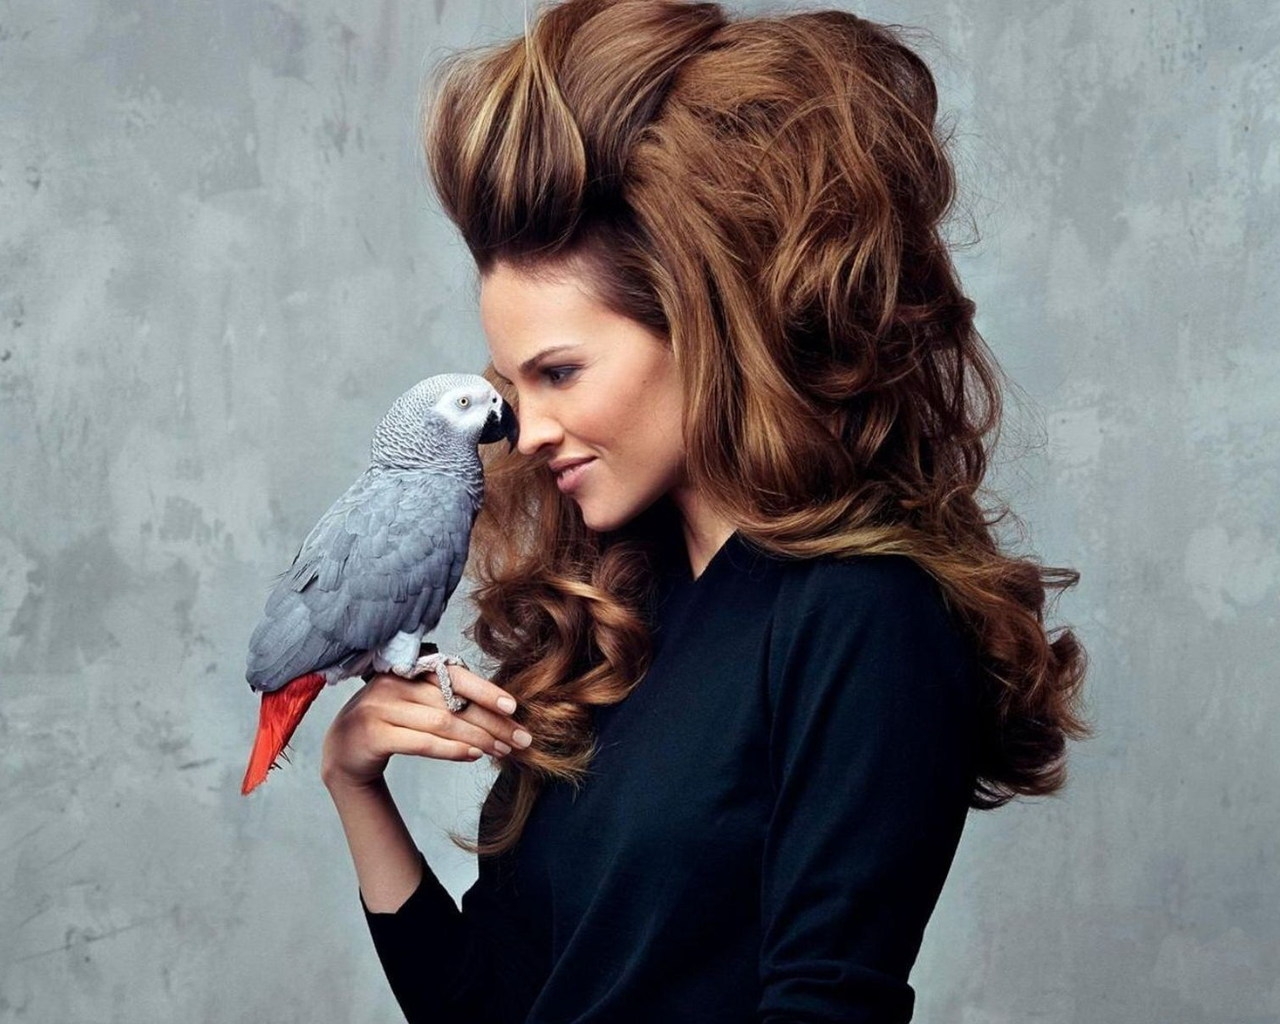 Hilary Swank Parrot for 1280 x 1024 resolution